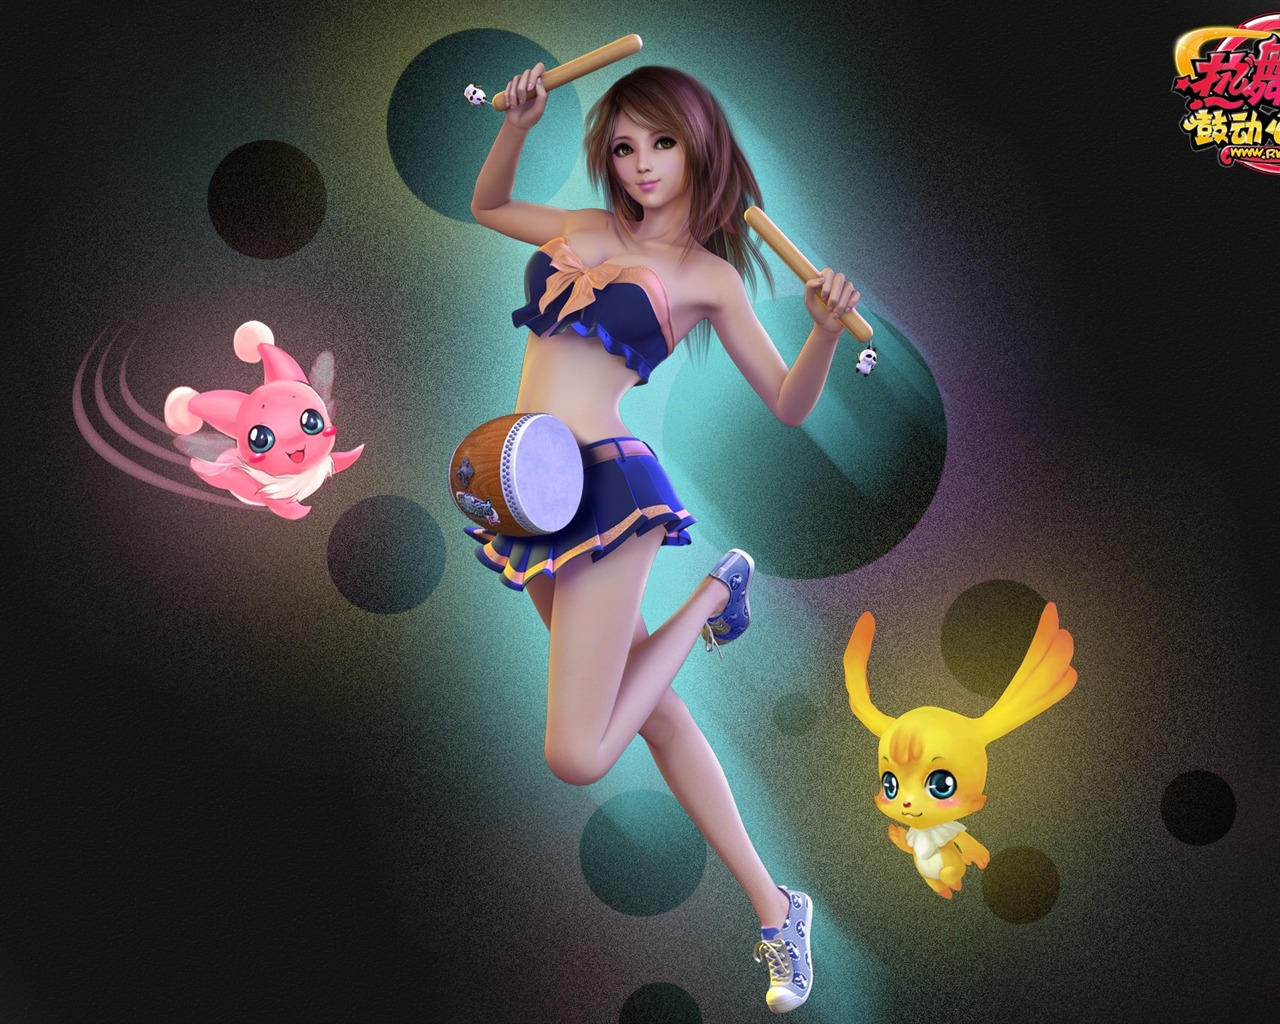 Online game Hot Dance Party II official wallpapers #16 - 1280x1024